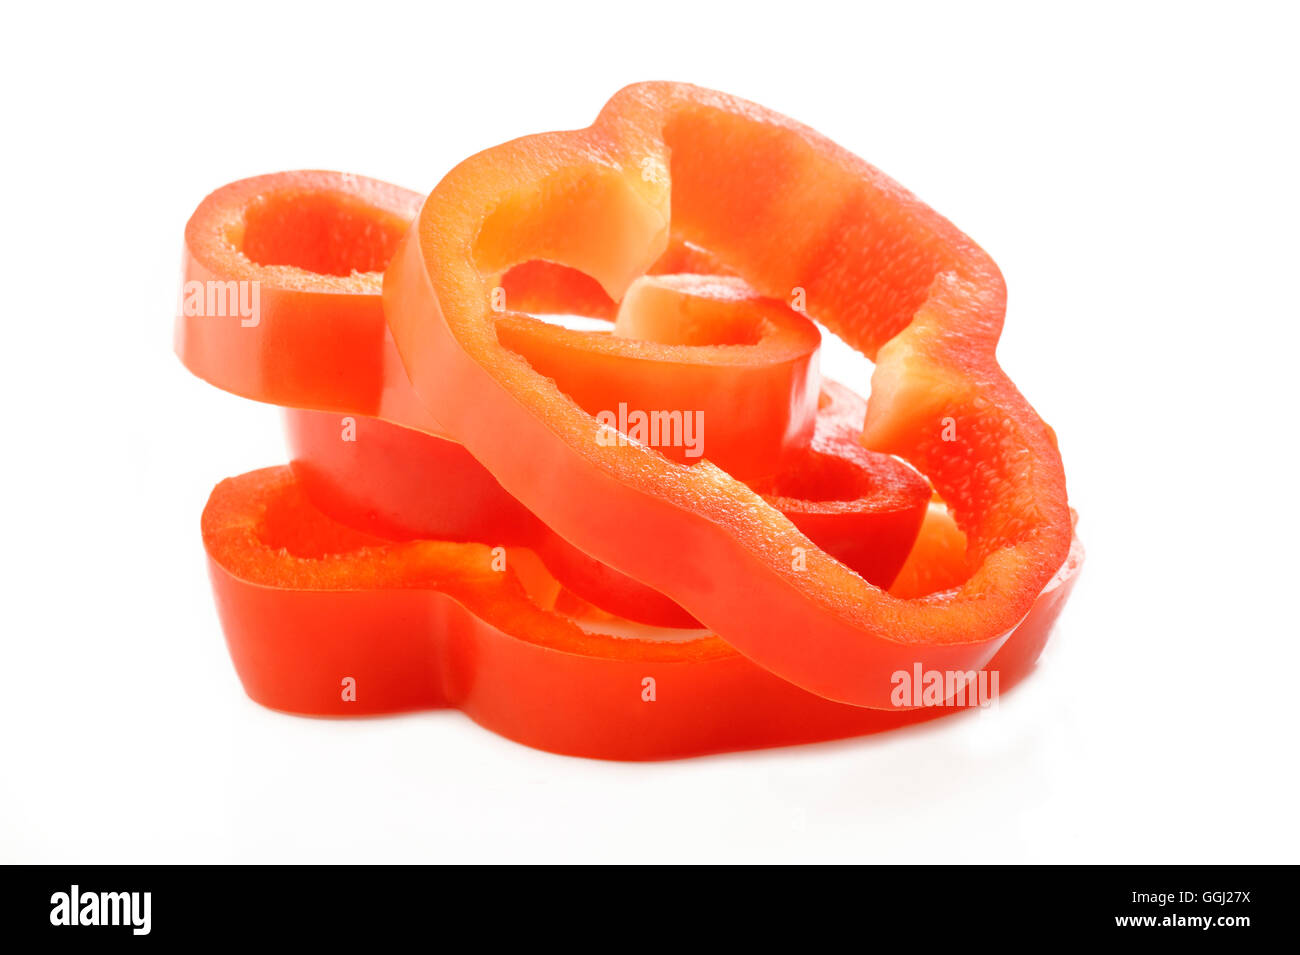 Sliced red pepper isolated on white background Stock Photo